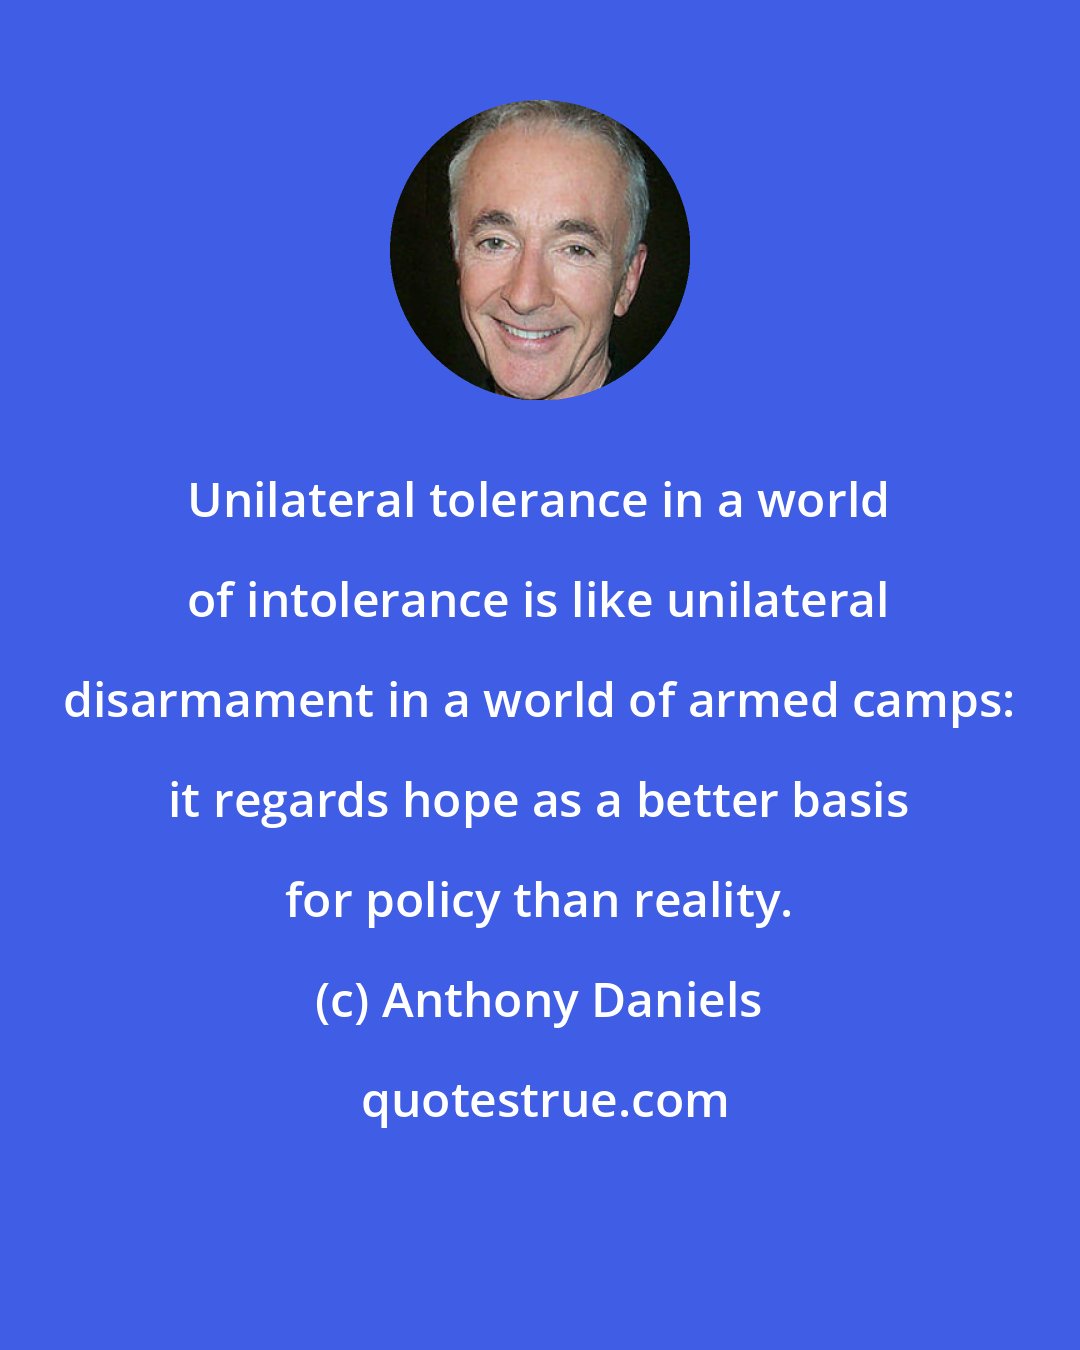 Anthony Daniels: Unilateral tolerance in a world of intolerance is like unilateral disarmament in a world of armed camps: it regards hope as a better basis for policy than reality.